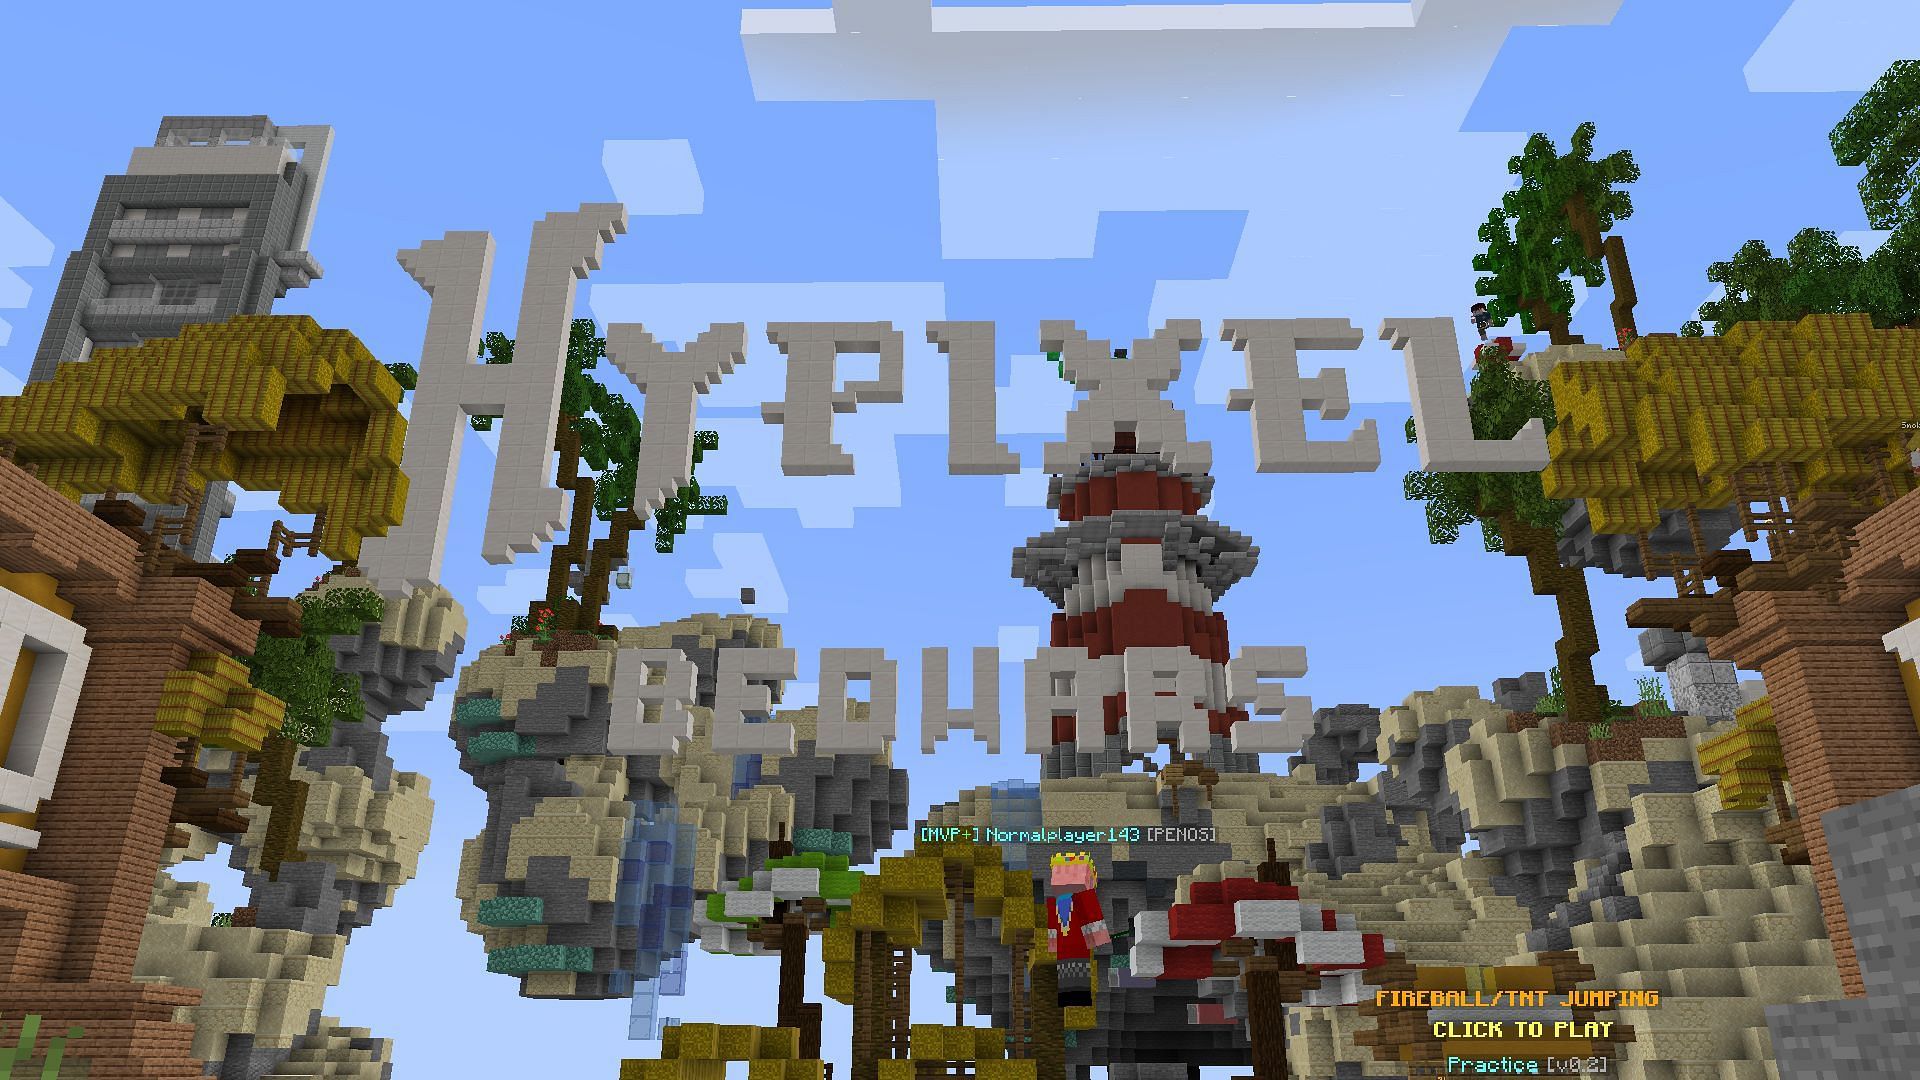 Bedwars hub in the famous Hypixel Minecraft server (Image via Mojang)